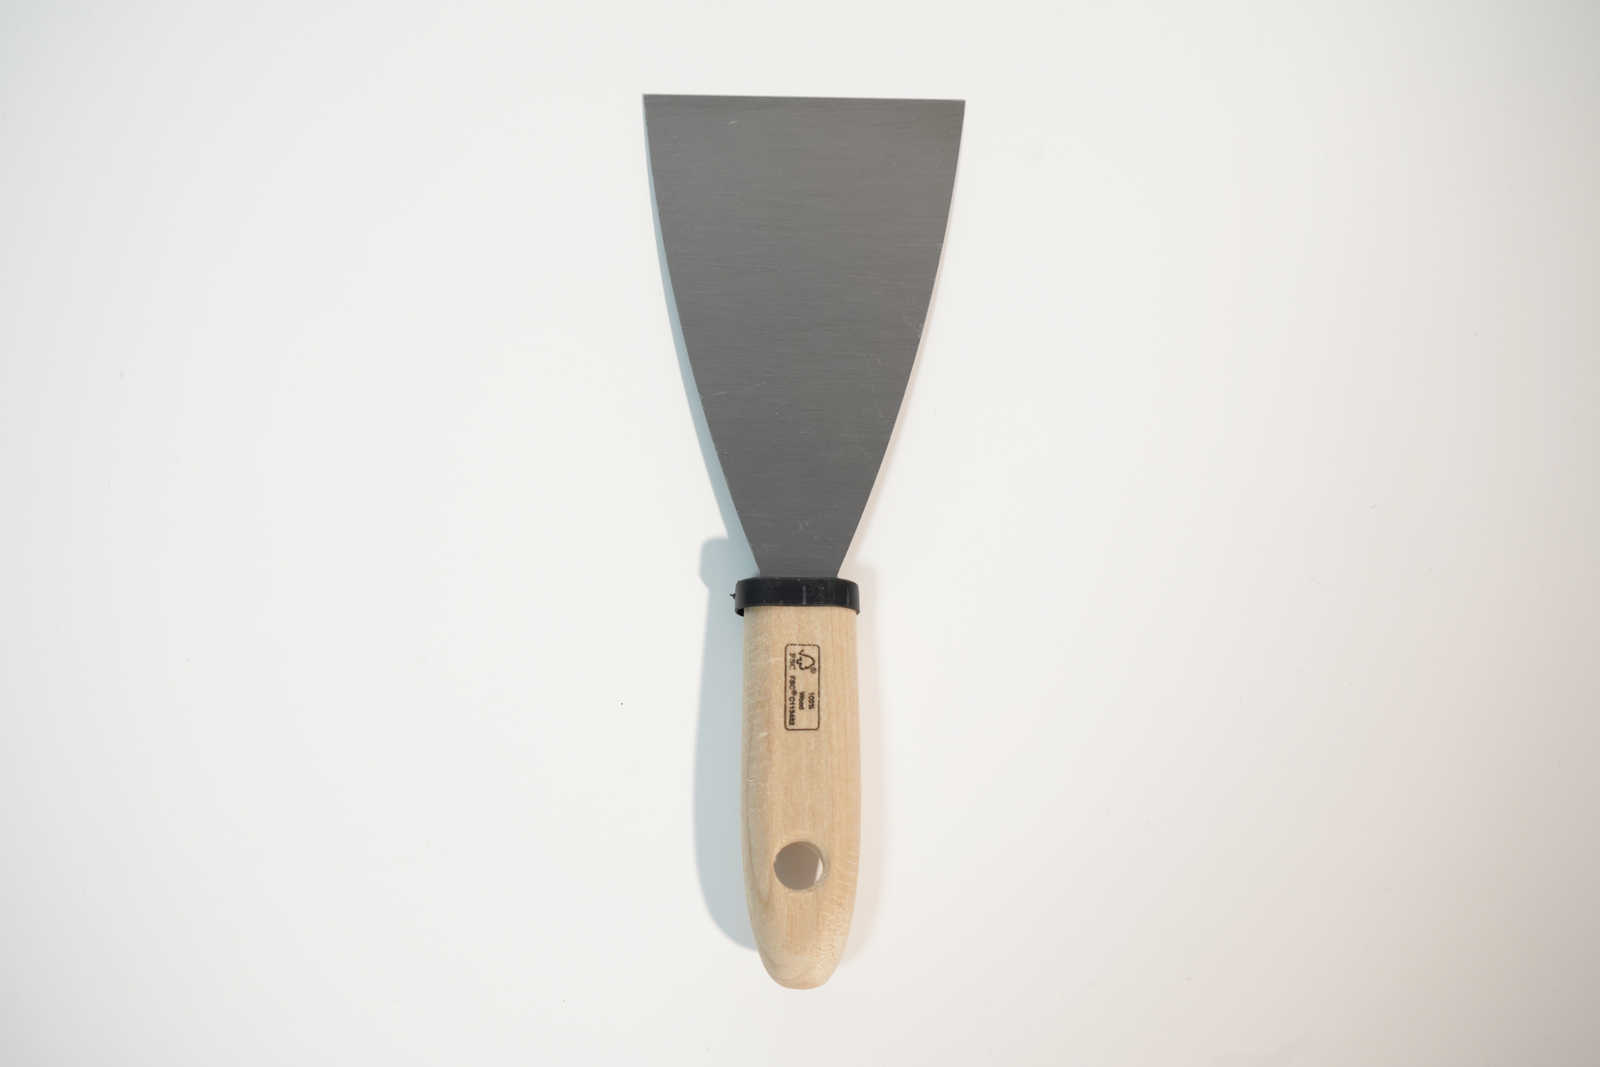             Painter spatula 80mm with flexible steel blade & wooden handle
        